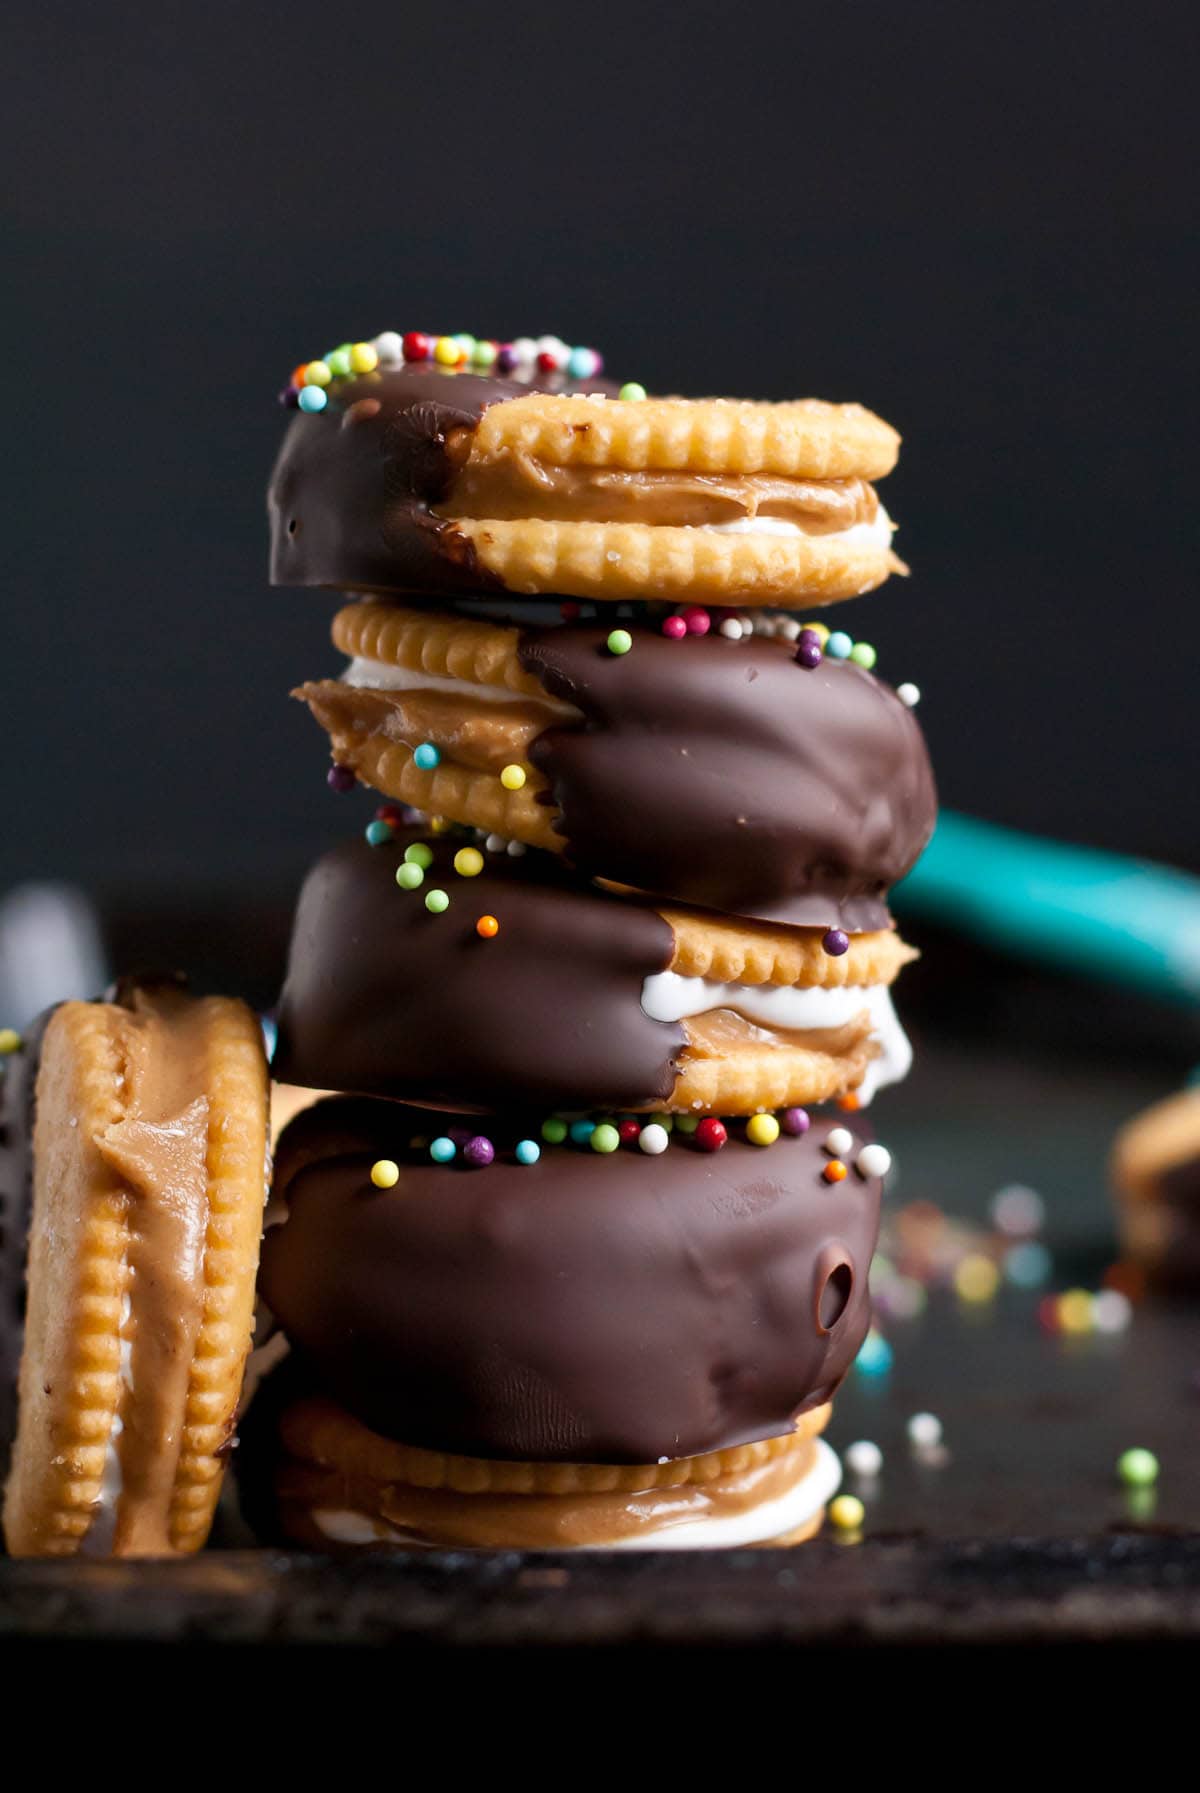 These four ingredient Chocolate Fluffernutter Ritz Cookie Sandwiches are the perfect treat for holiday parties!